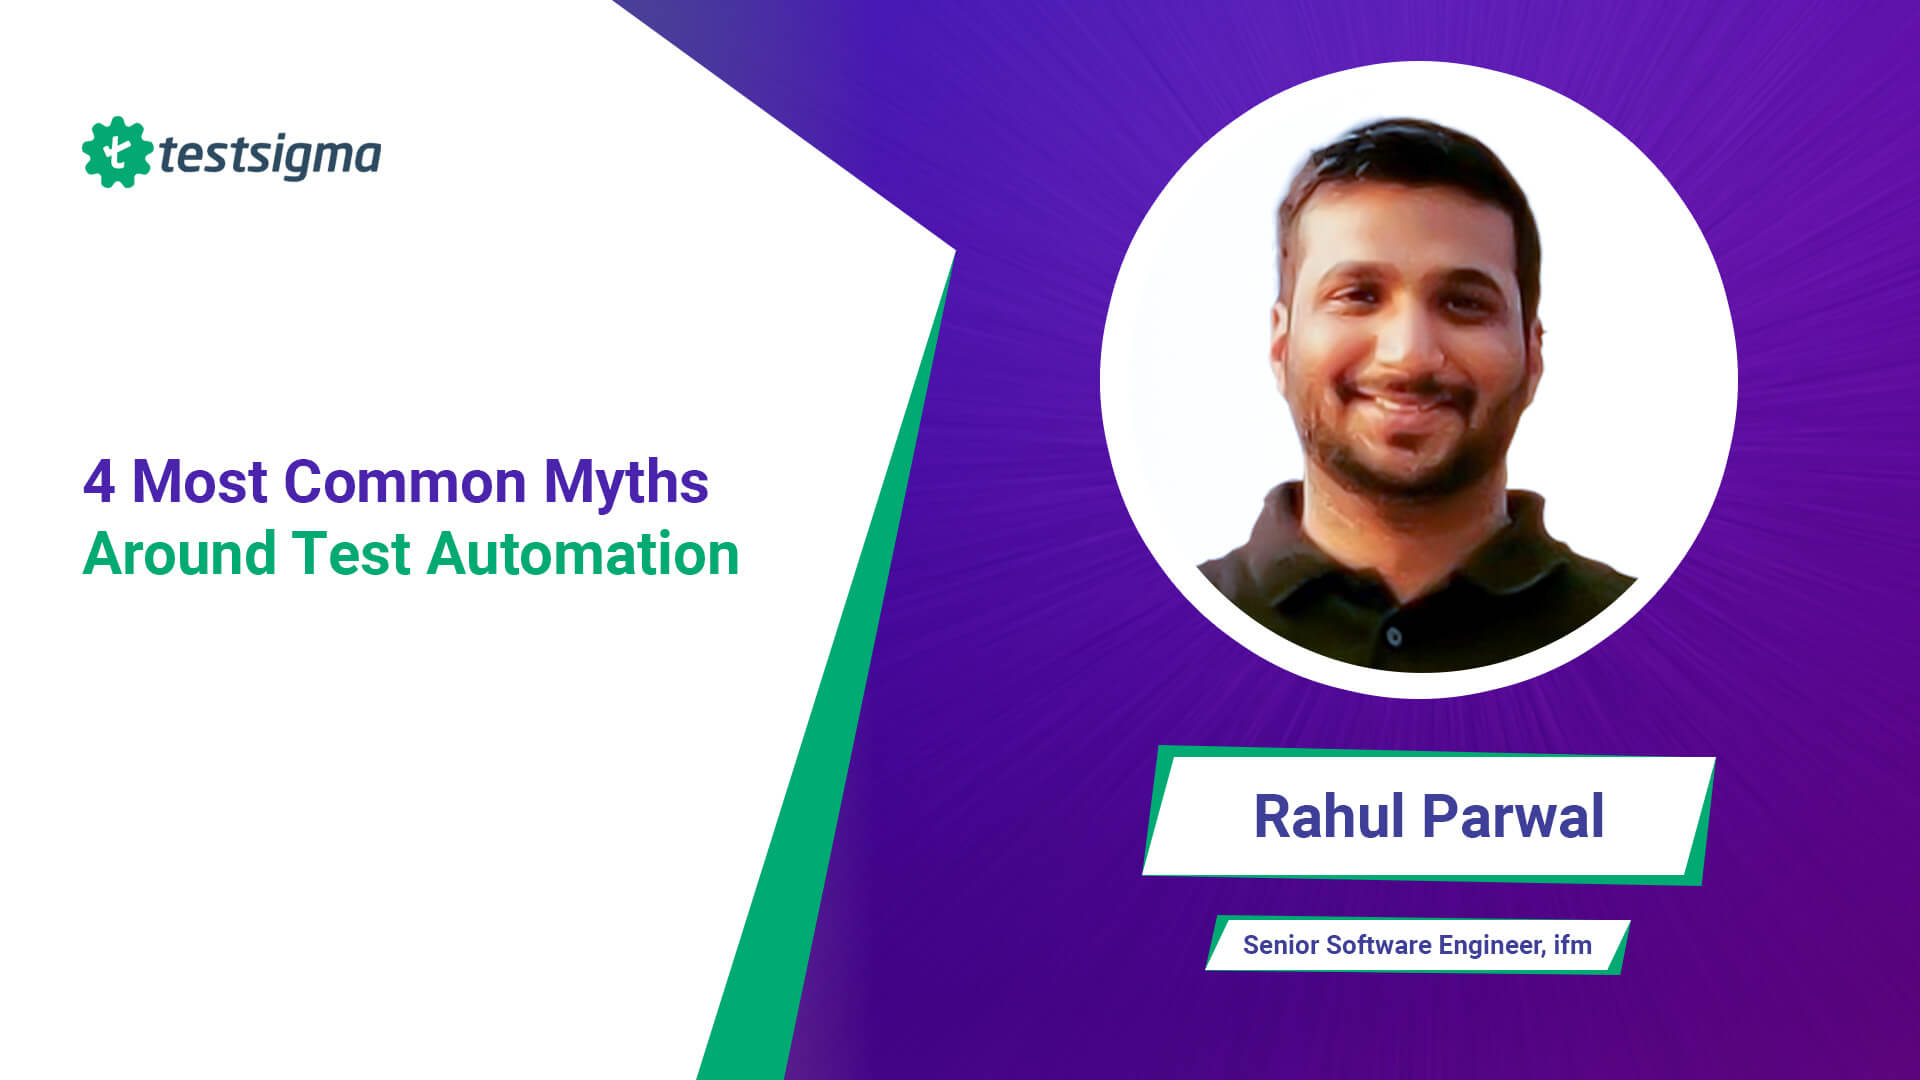 4 Most Common Myths Around Test Automation